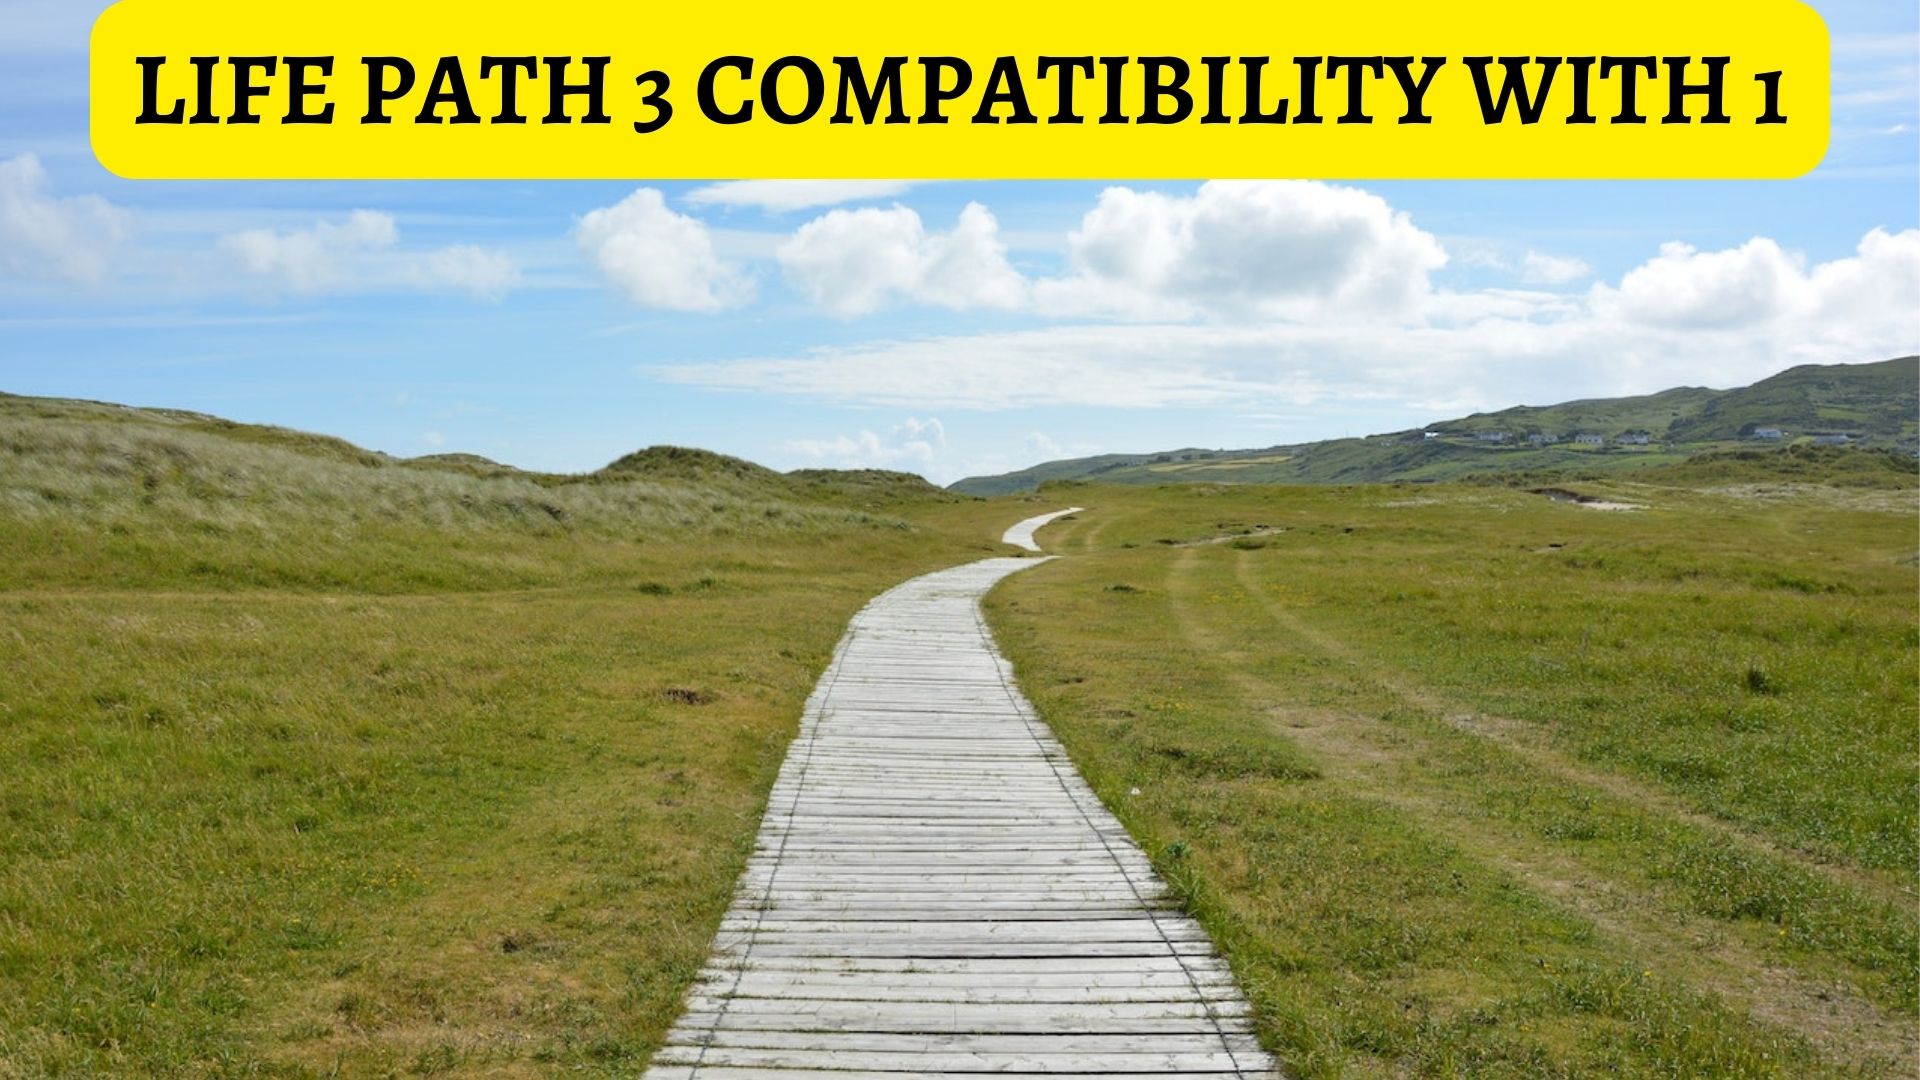 Life Path 3 Compatibility With 1 - Very Lively Couple